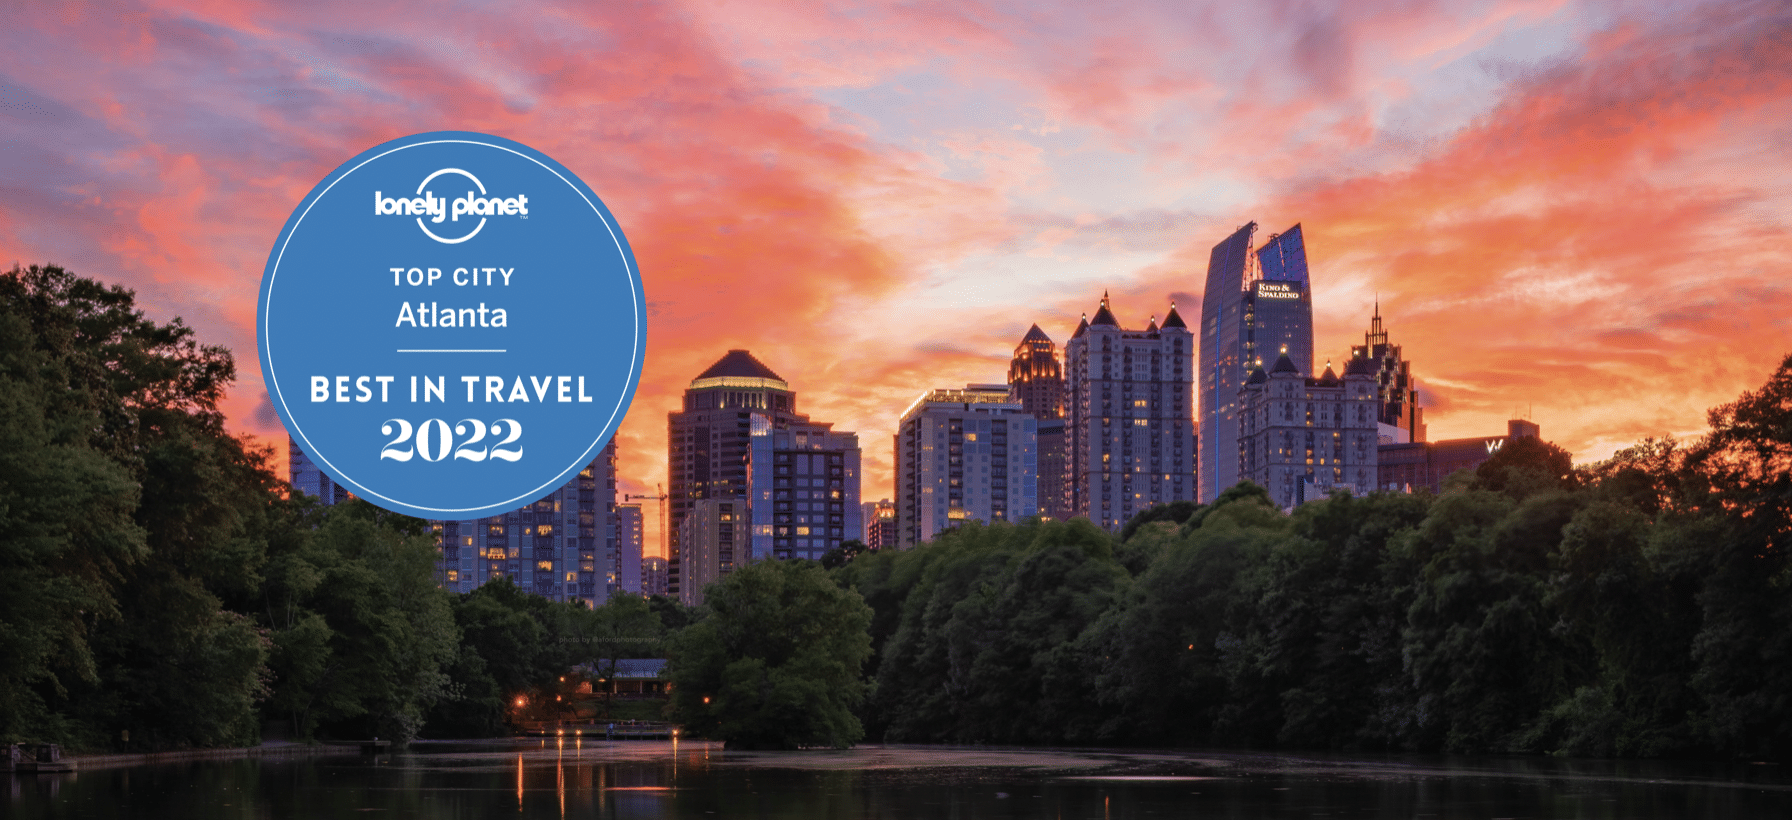 sunset shot of buildings in Atlanta Georgia against a fiery red sky with the Lonely Planet's Best Travel List 2022 badge